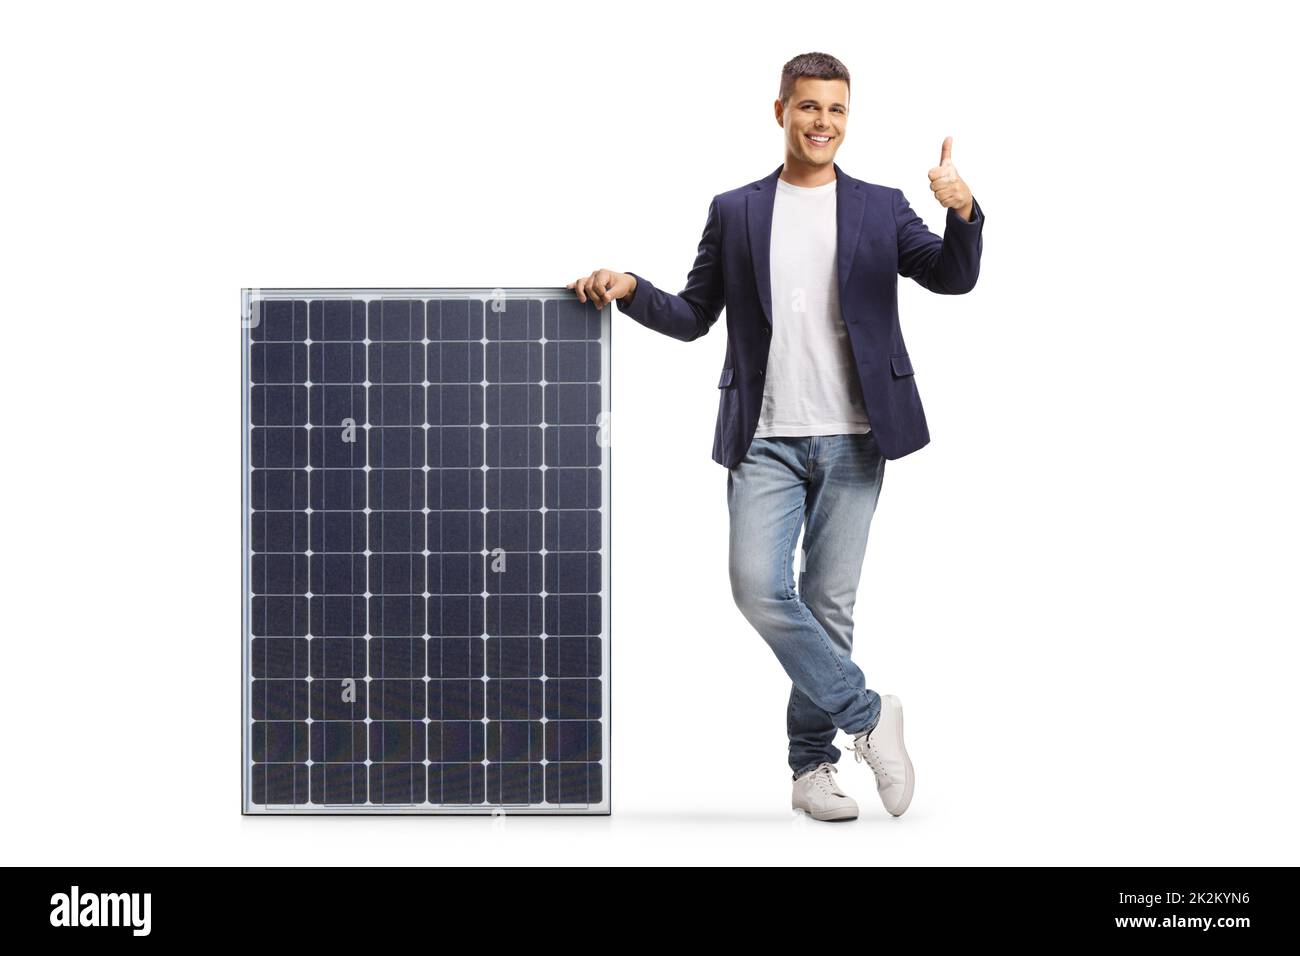 Young man leaning on a solar panel and showing thumbs up isolated on white background Stock Photo